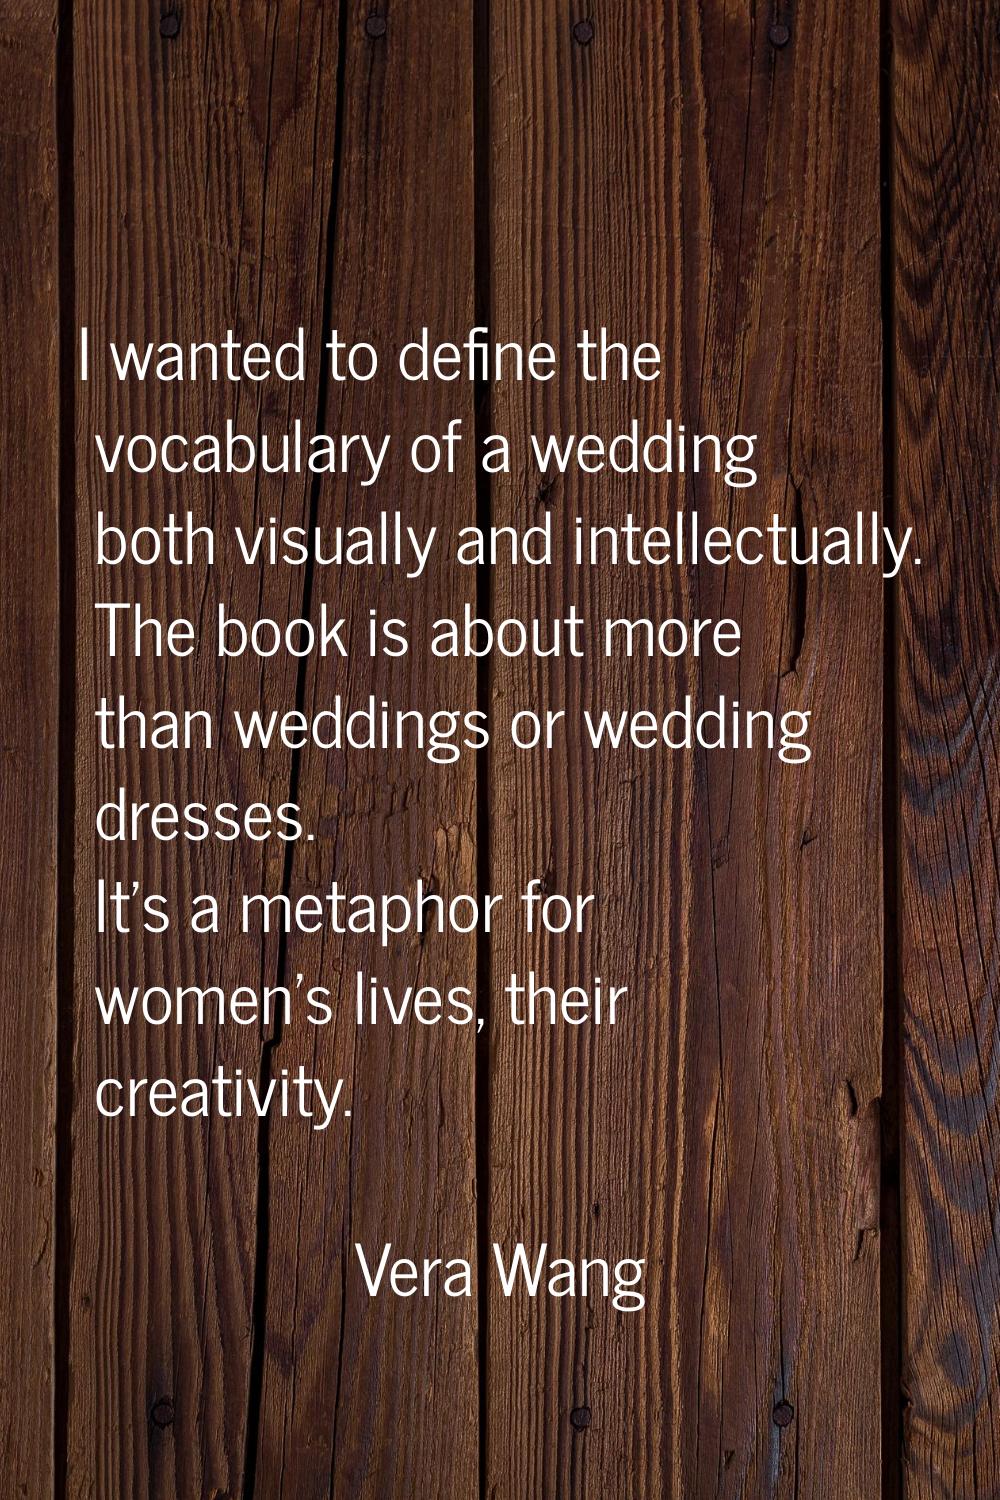 I wanted to define the vocabulary of a wedding both visually and intellectually. The book is about 